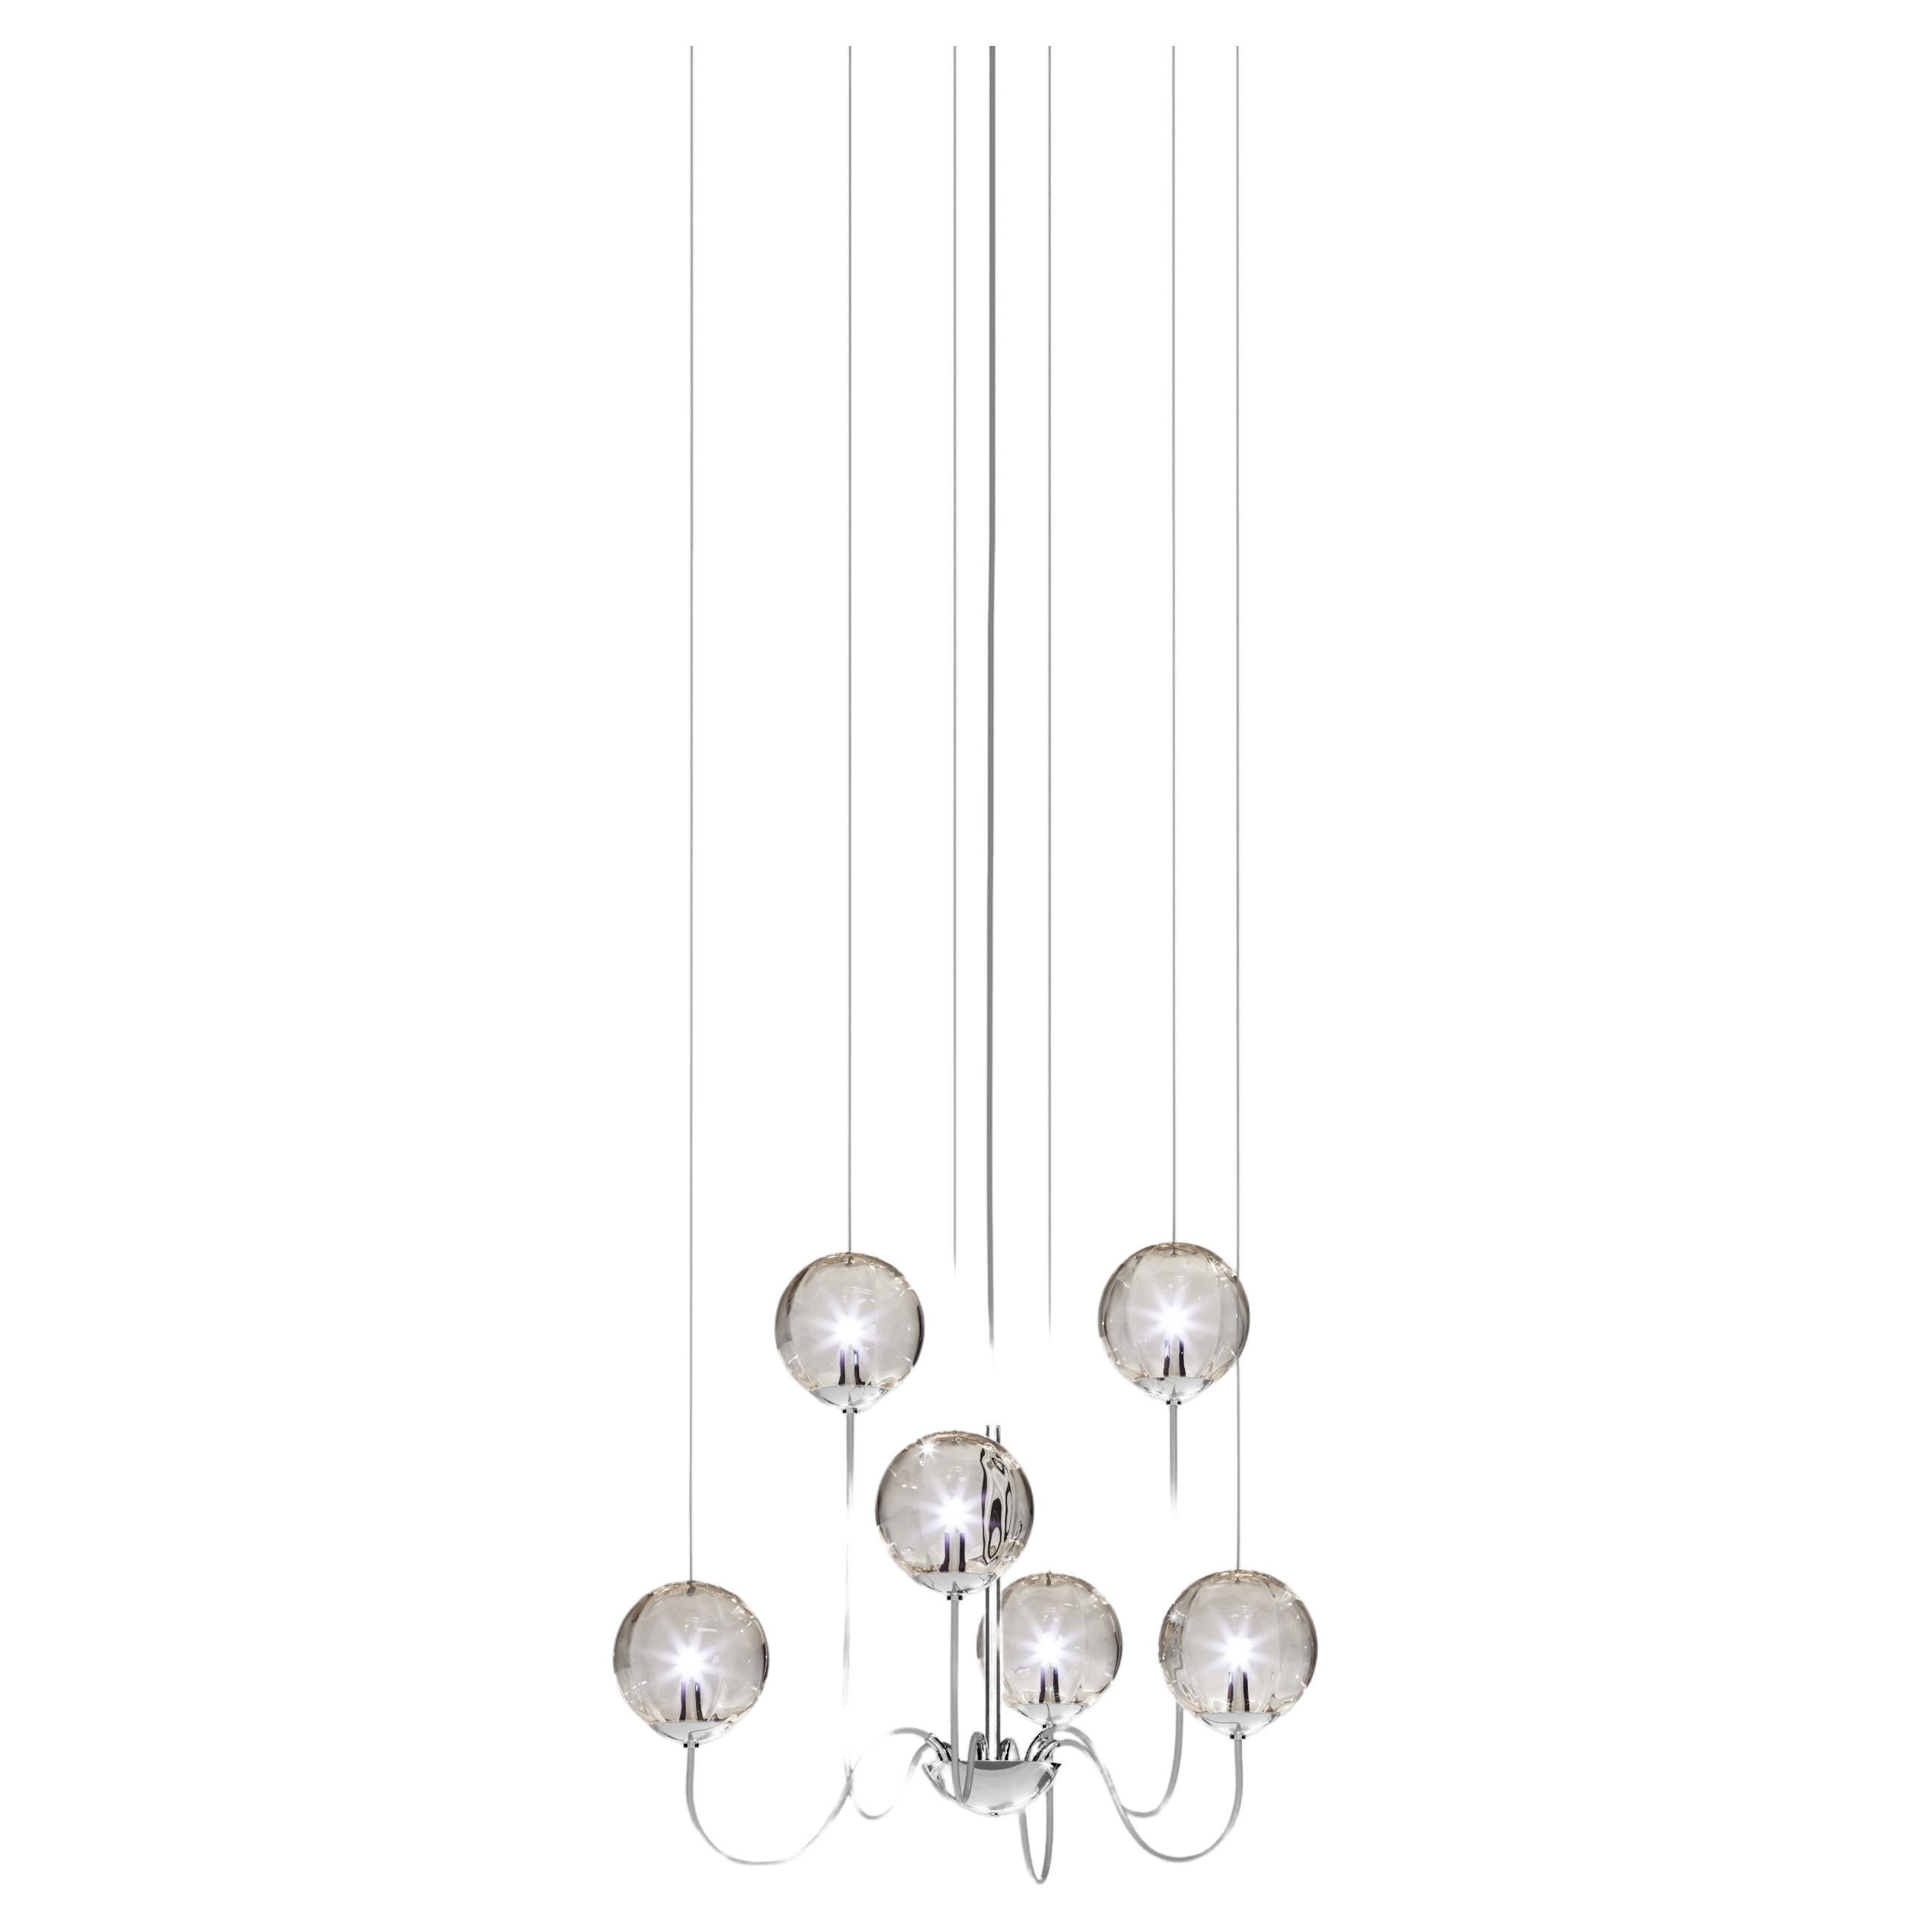 Vistosi Puppet Pendant Light in Smoky Transparent Glass And Glossy Chrome Frame For Sale